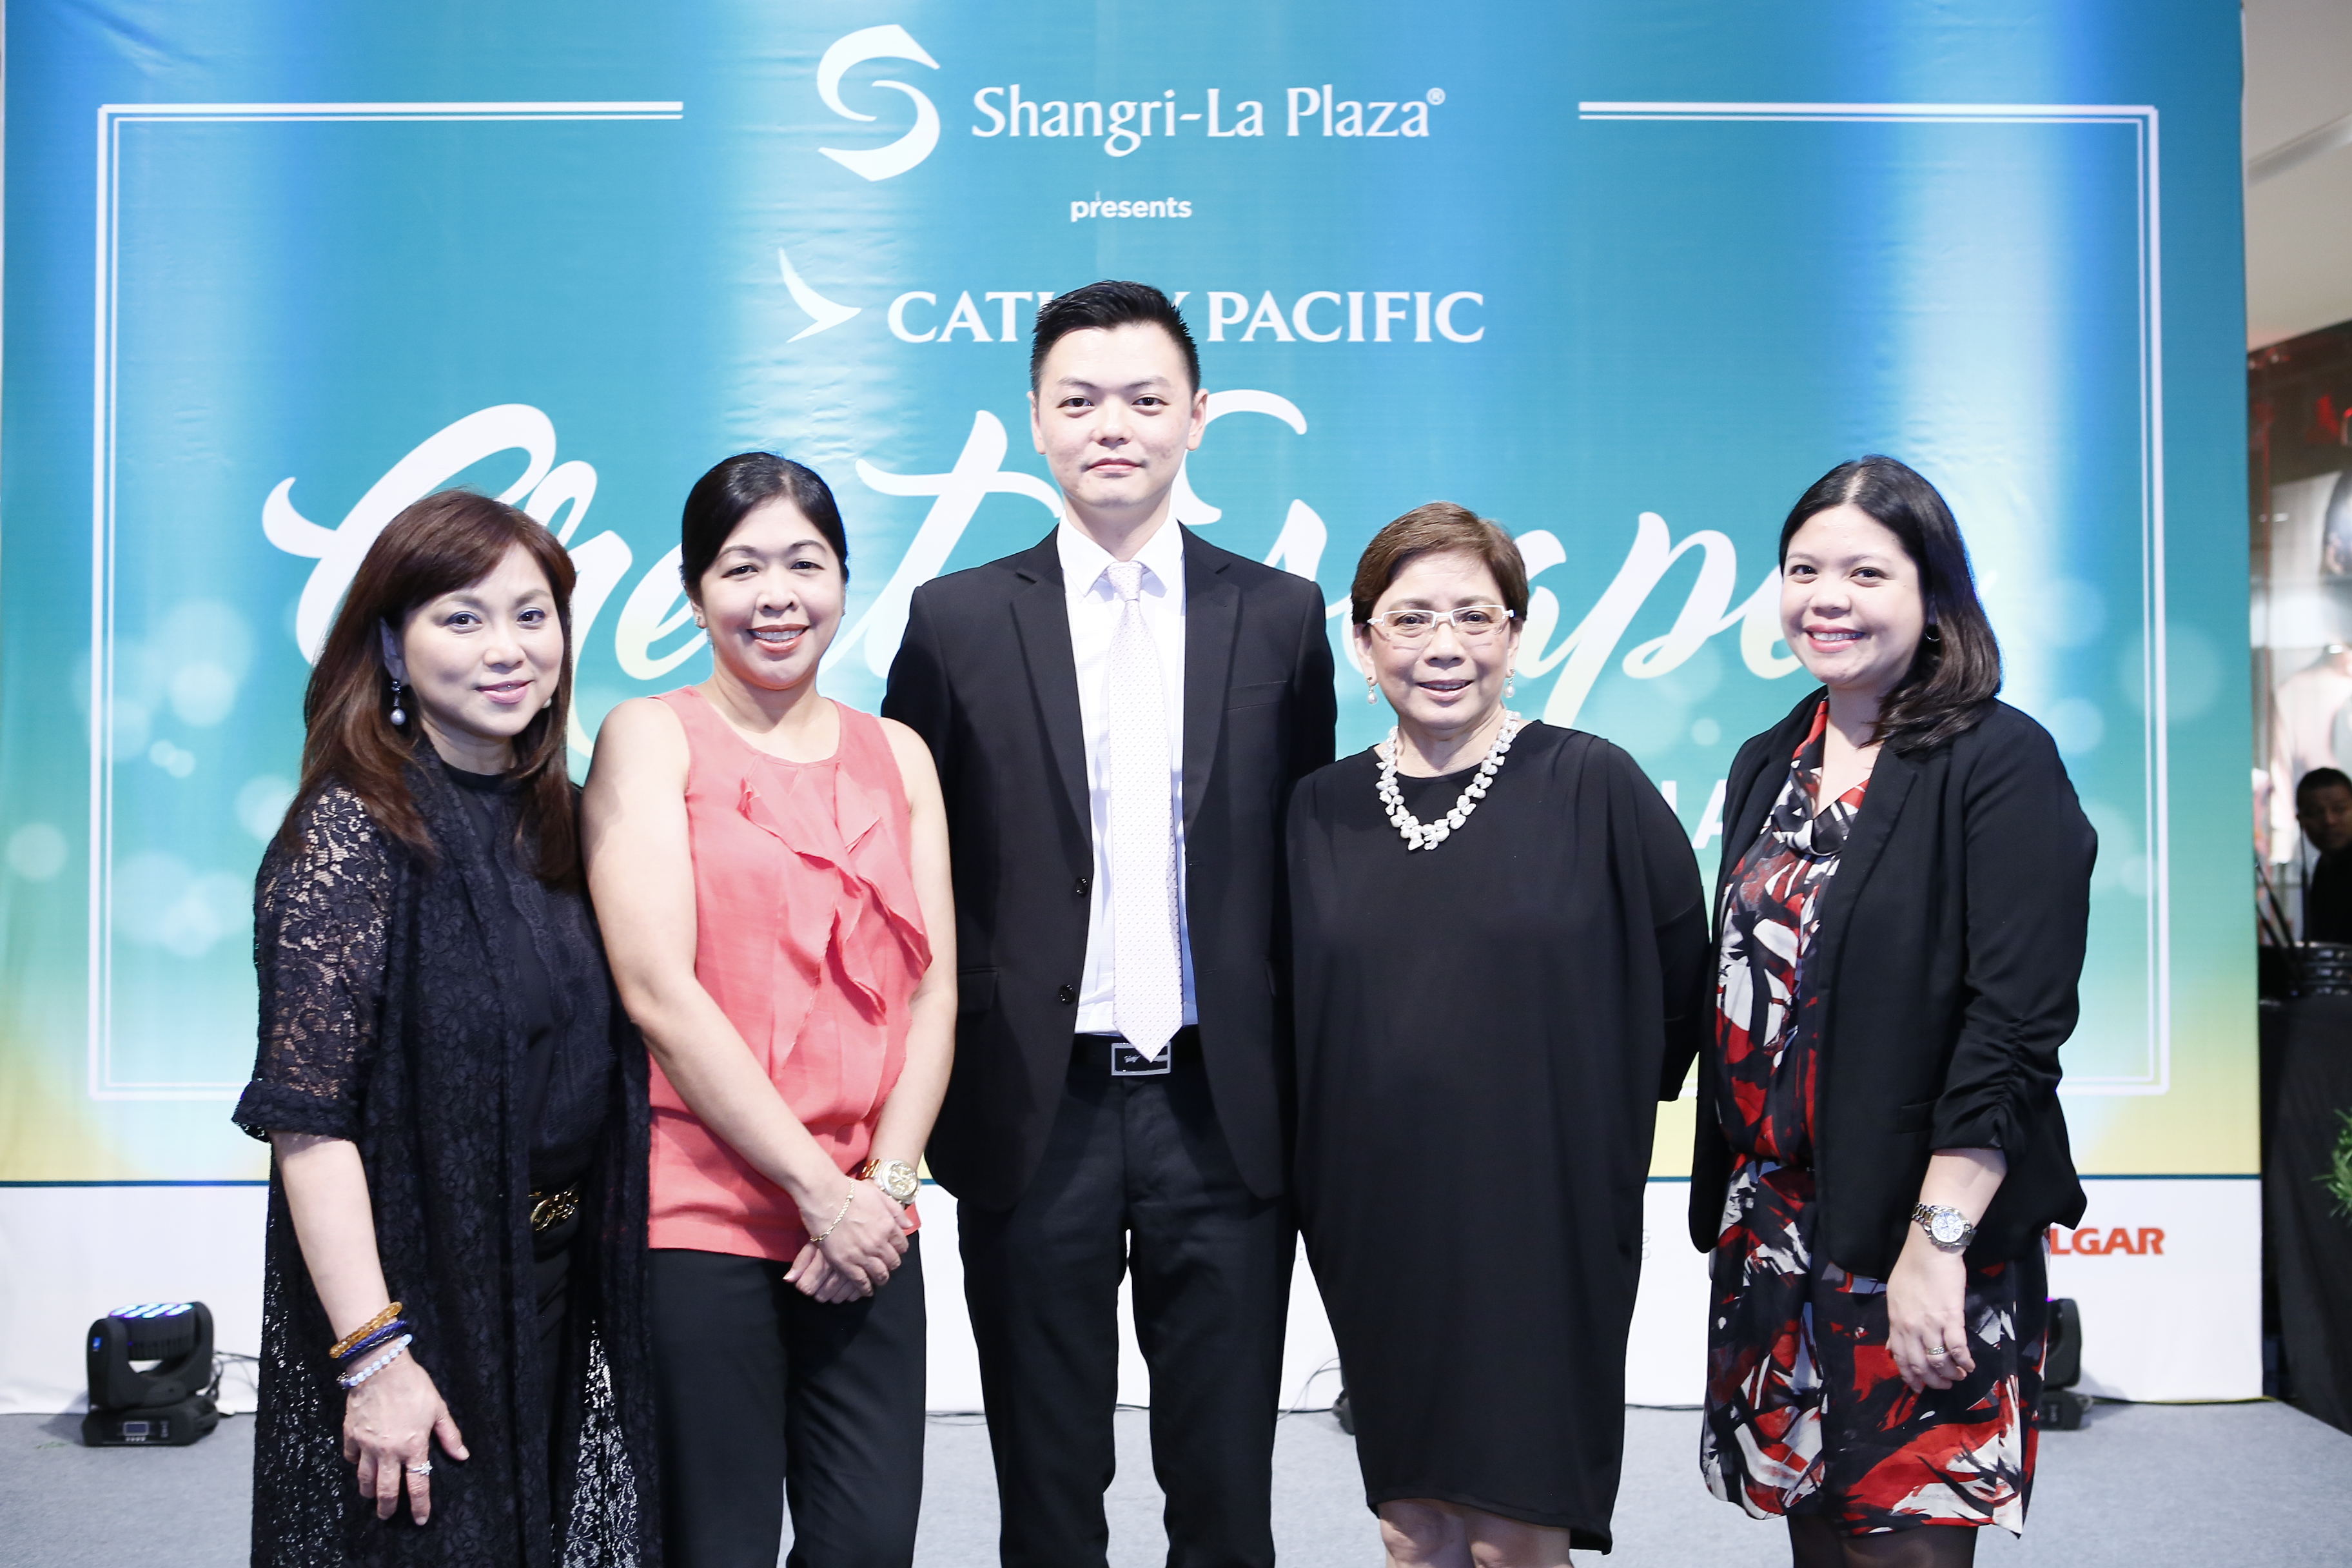 The Greatest Summer Escapes Yet with Shangri-La + Cathay Pacific